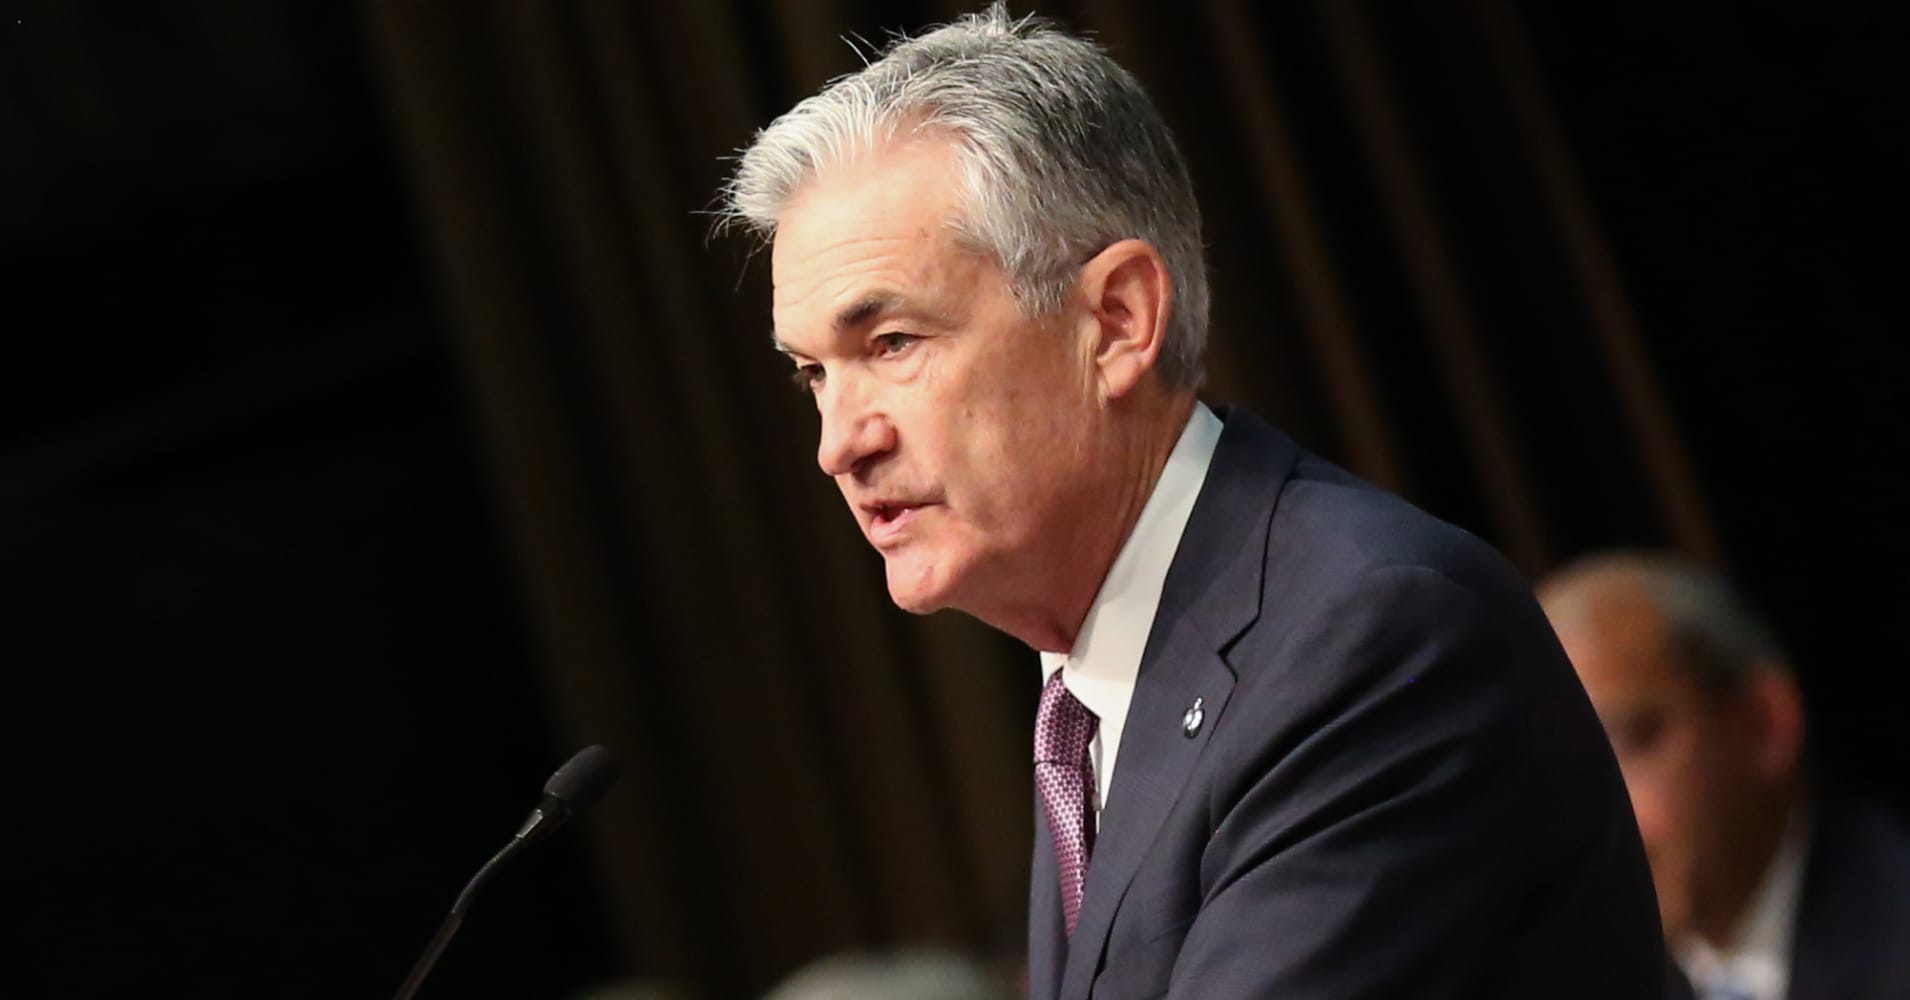 Fed's Powell puts focus on spreading benefits of a strong economy